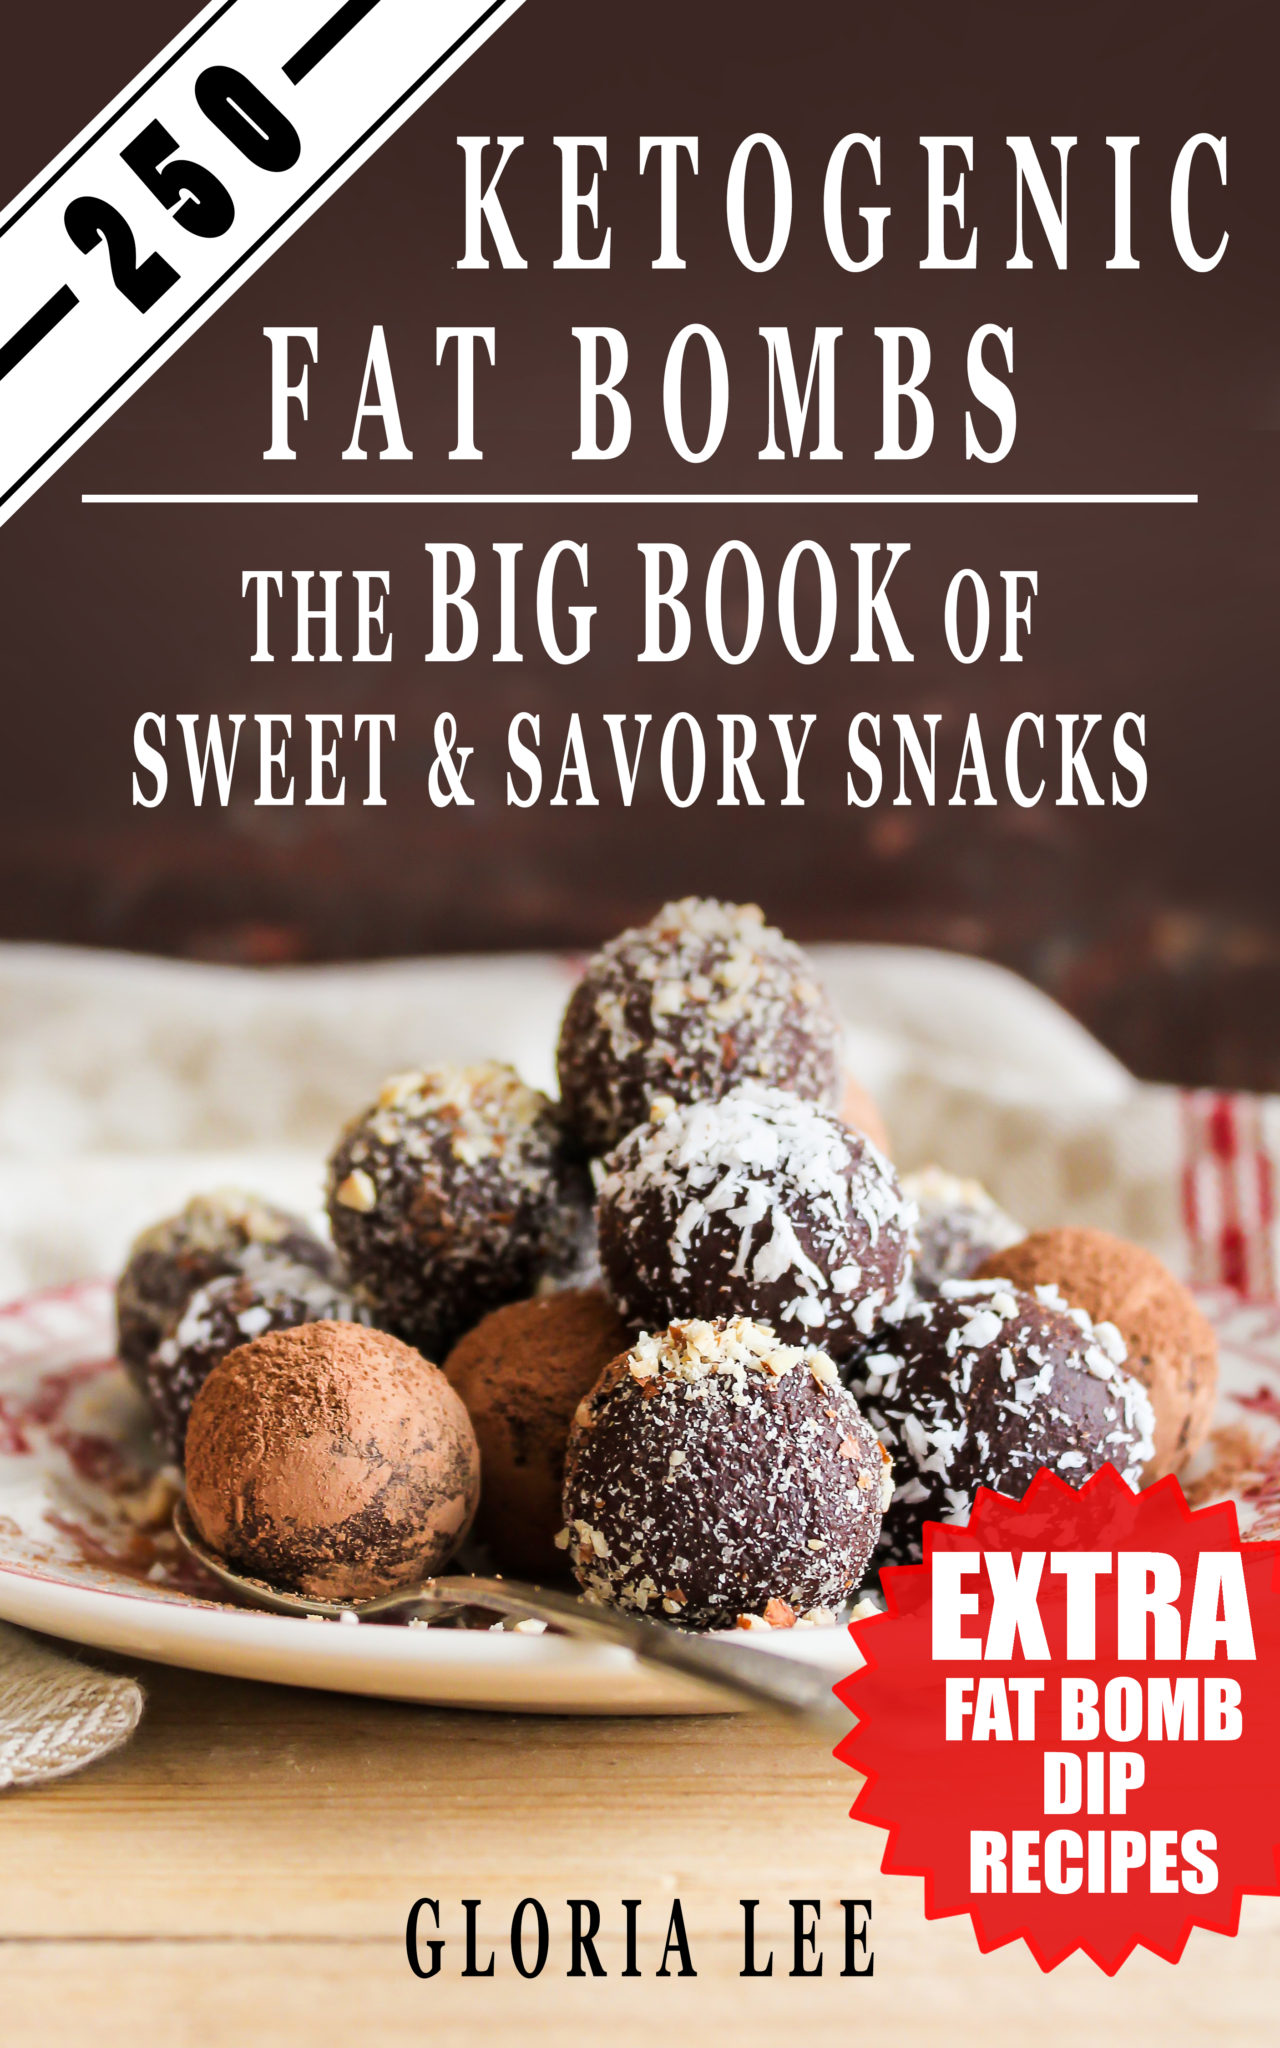 FREE: 250 Ketogenic Fat Bombs: The Big Book Of Sweet and Savory Snacks (Extra Fat Bomb Dip Recipes) by Gloria Lee